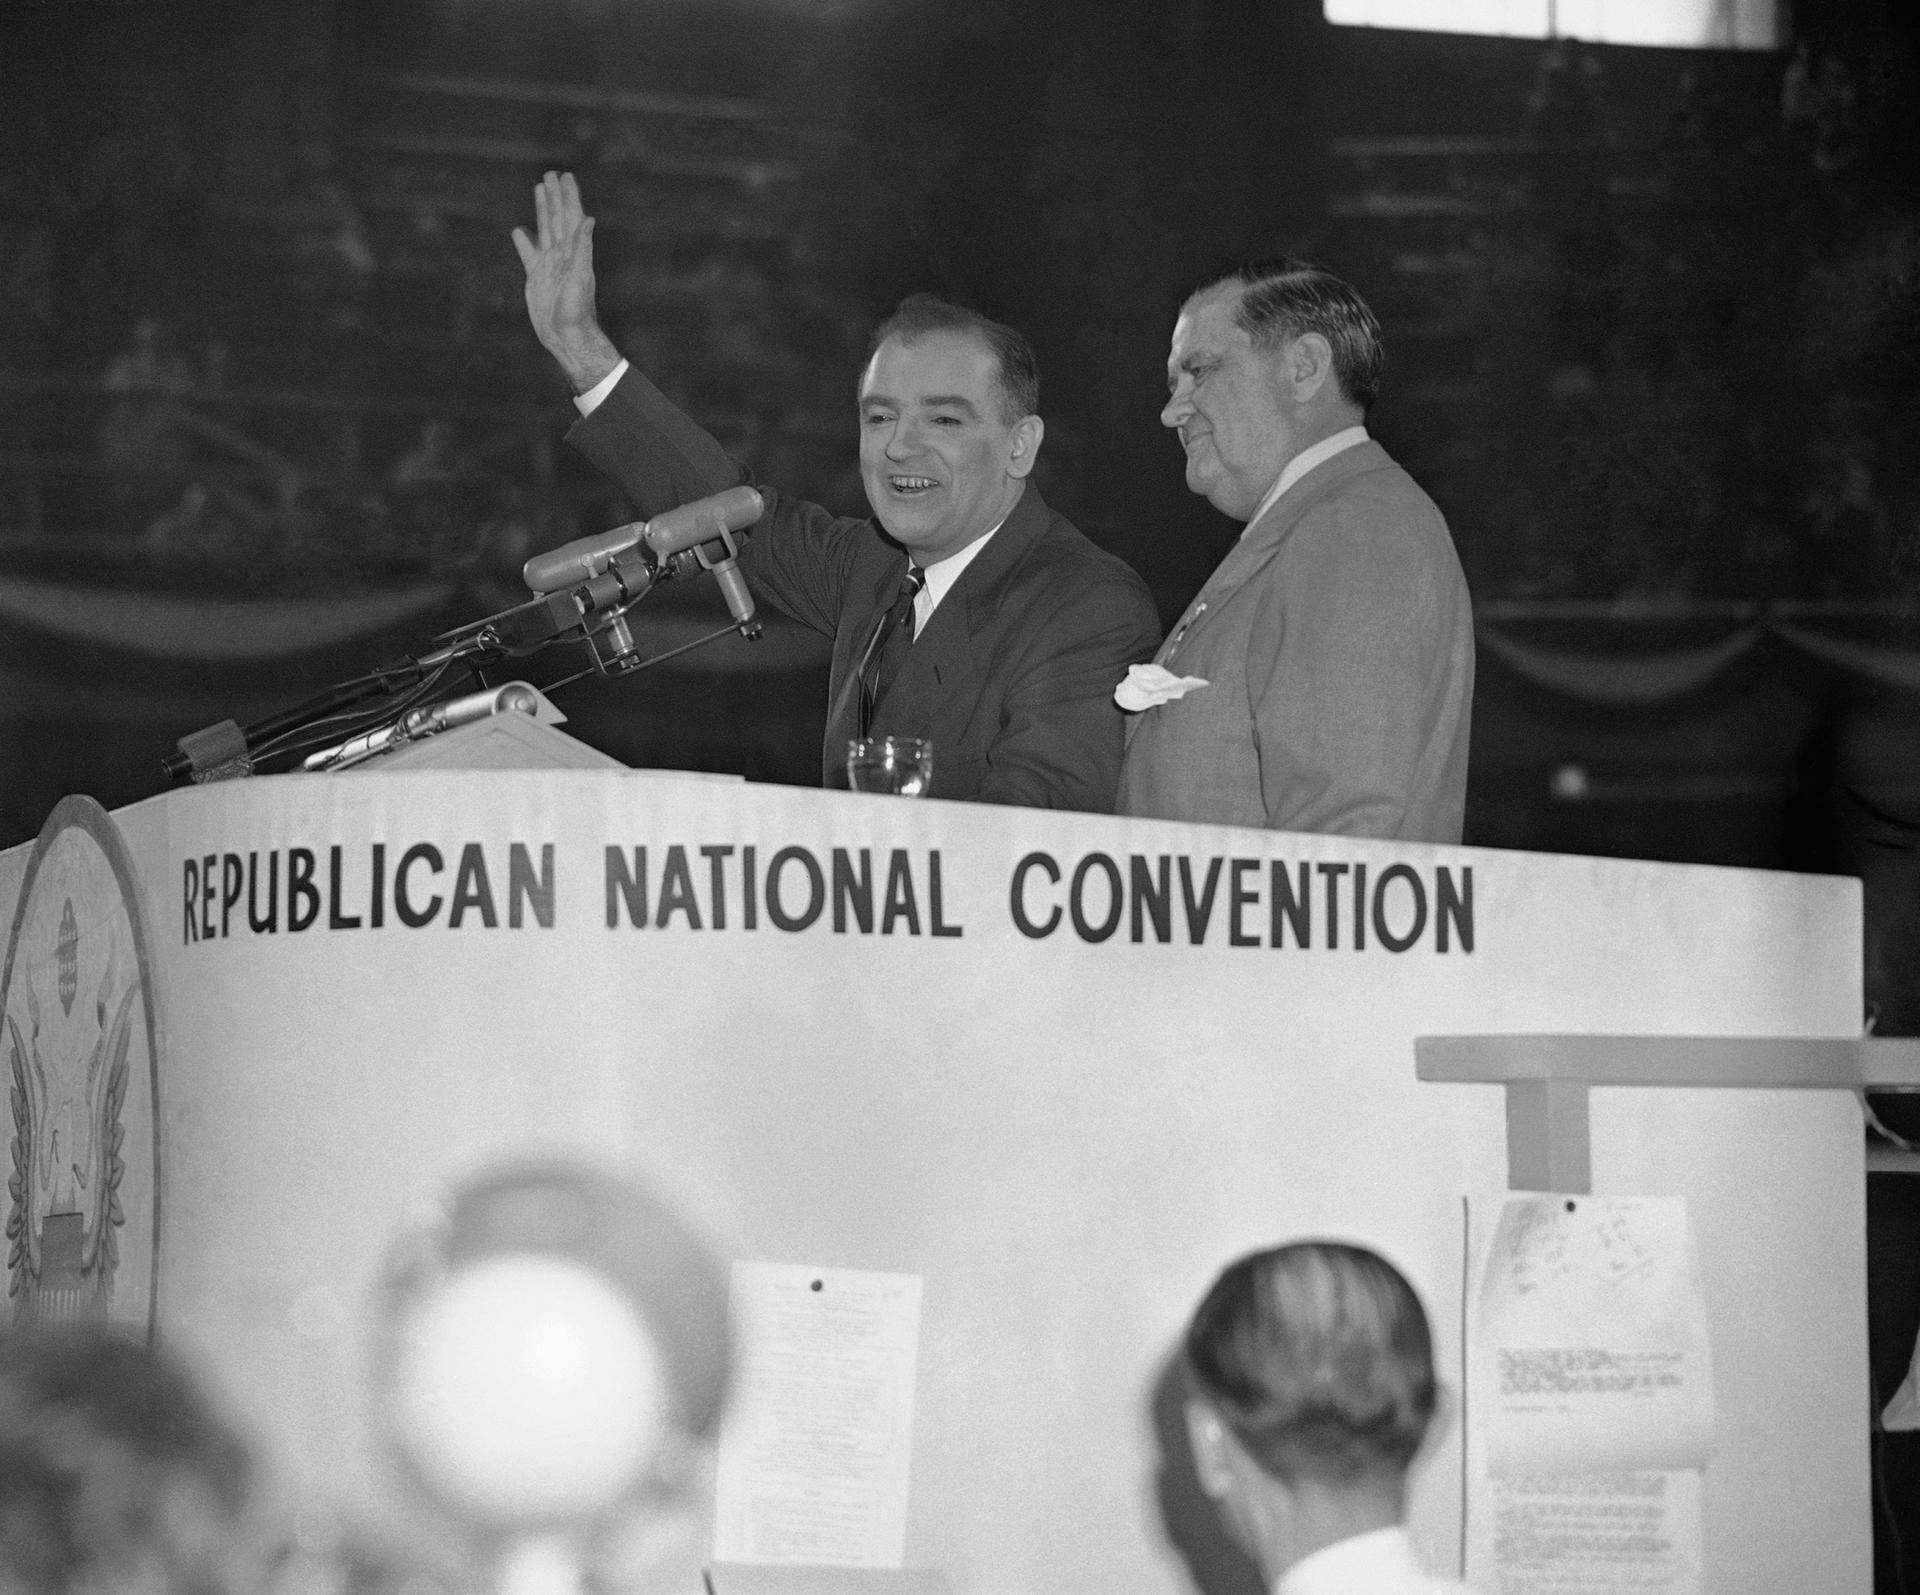 A black and gray photo of Sen. Joseph McCarthy and another male, both in suits, standing behind a podium that says Republican National Convention